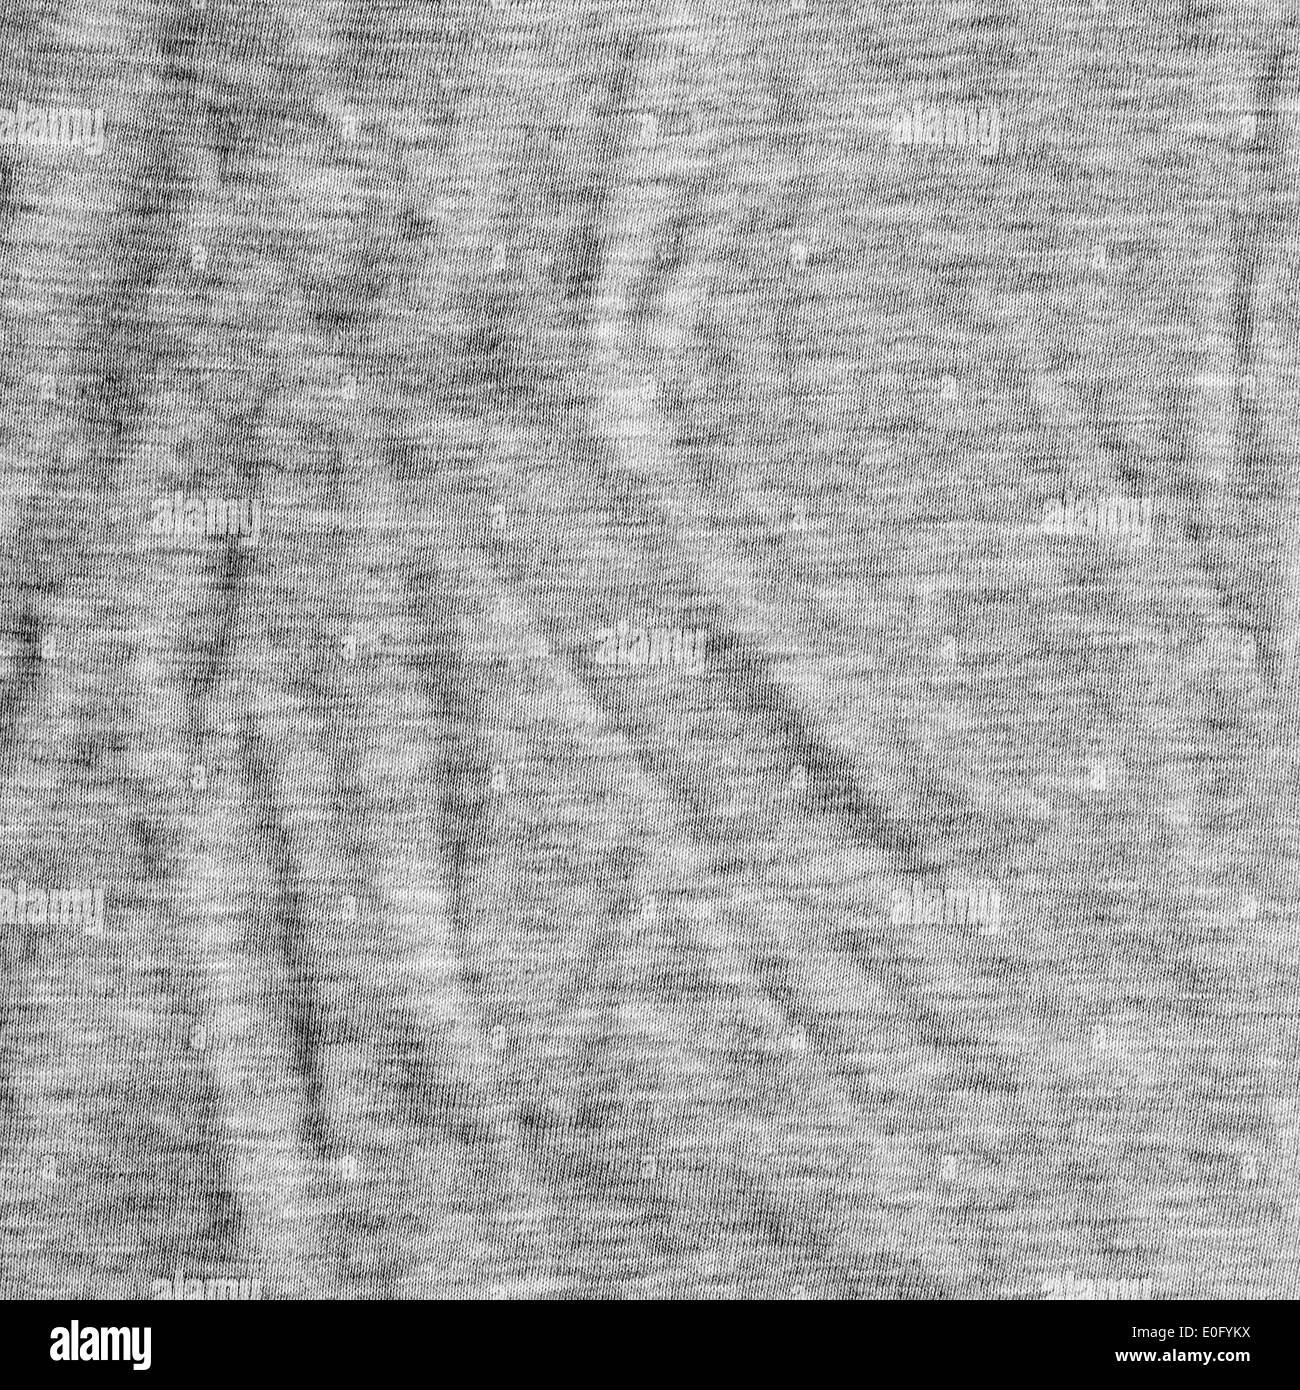 Grey fabric texture. Background with delicate striped pattern. Stock Photo